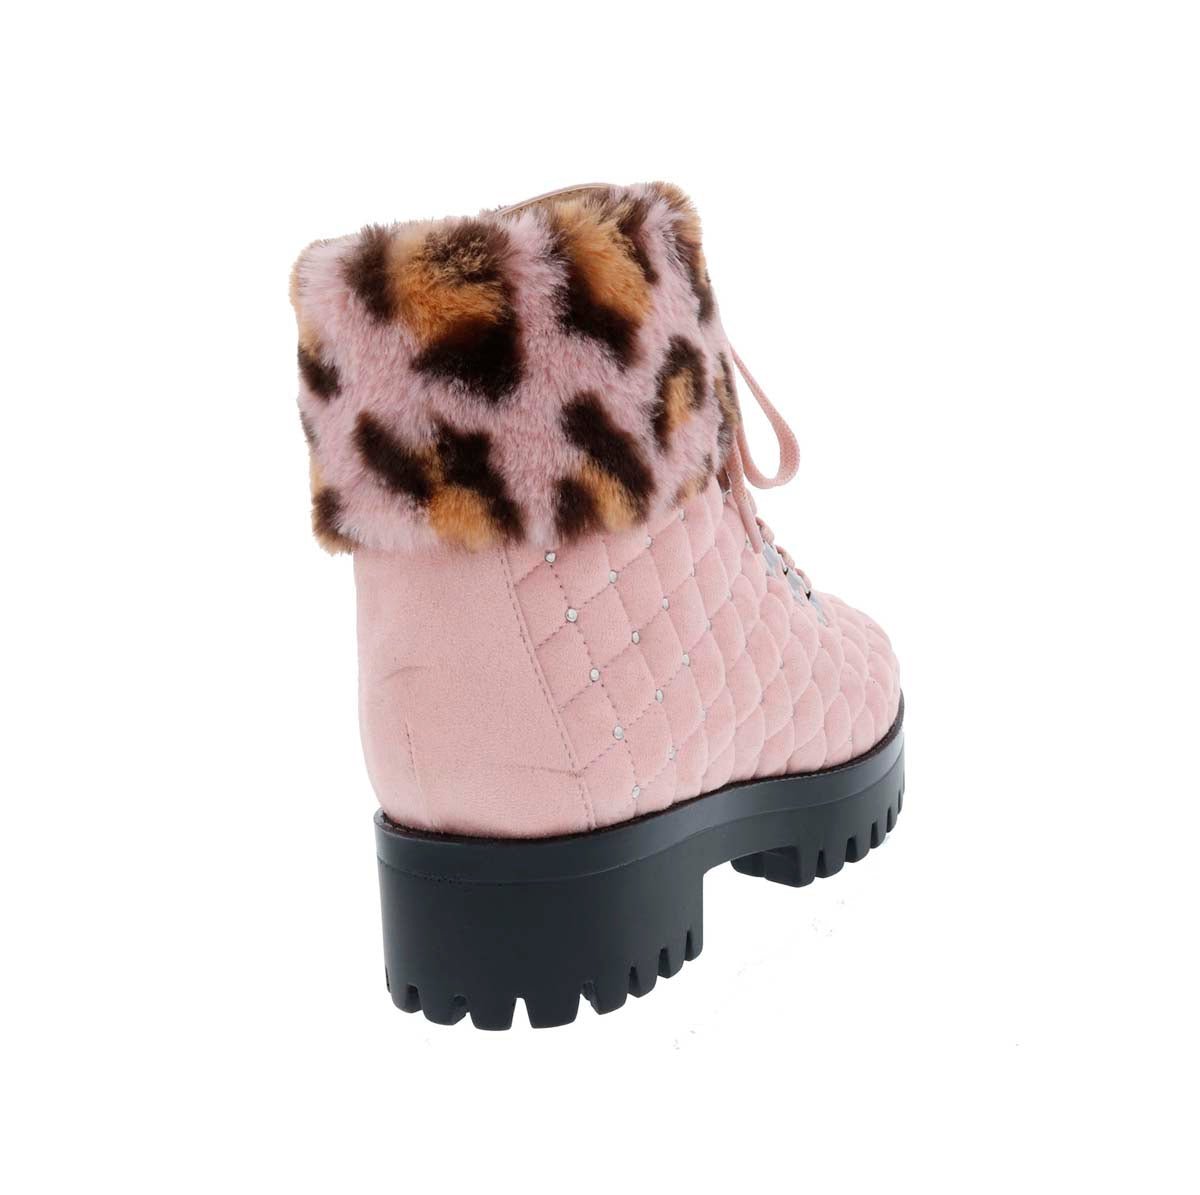 PENNY LOVES KENNY NEWB WOMEN ANKLE BOOTIES IN PINK MICROSUEDE - TLW Shoes